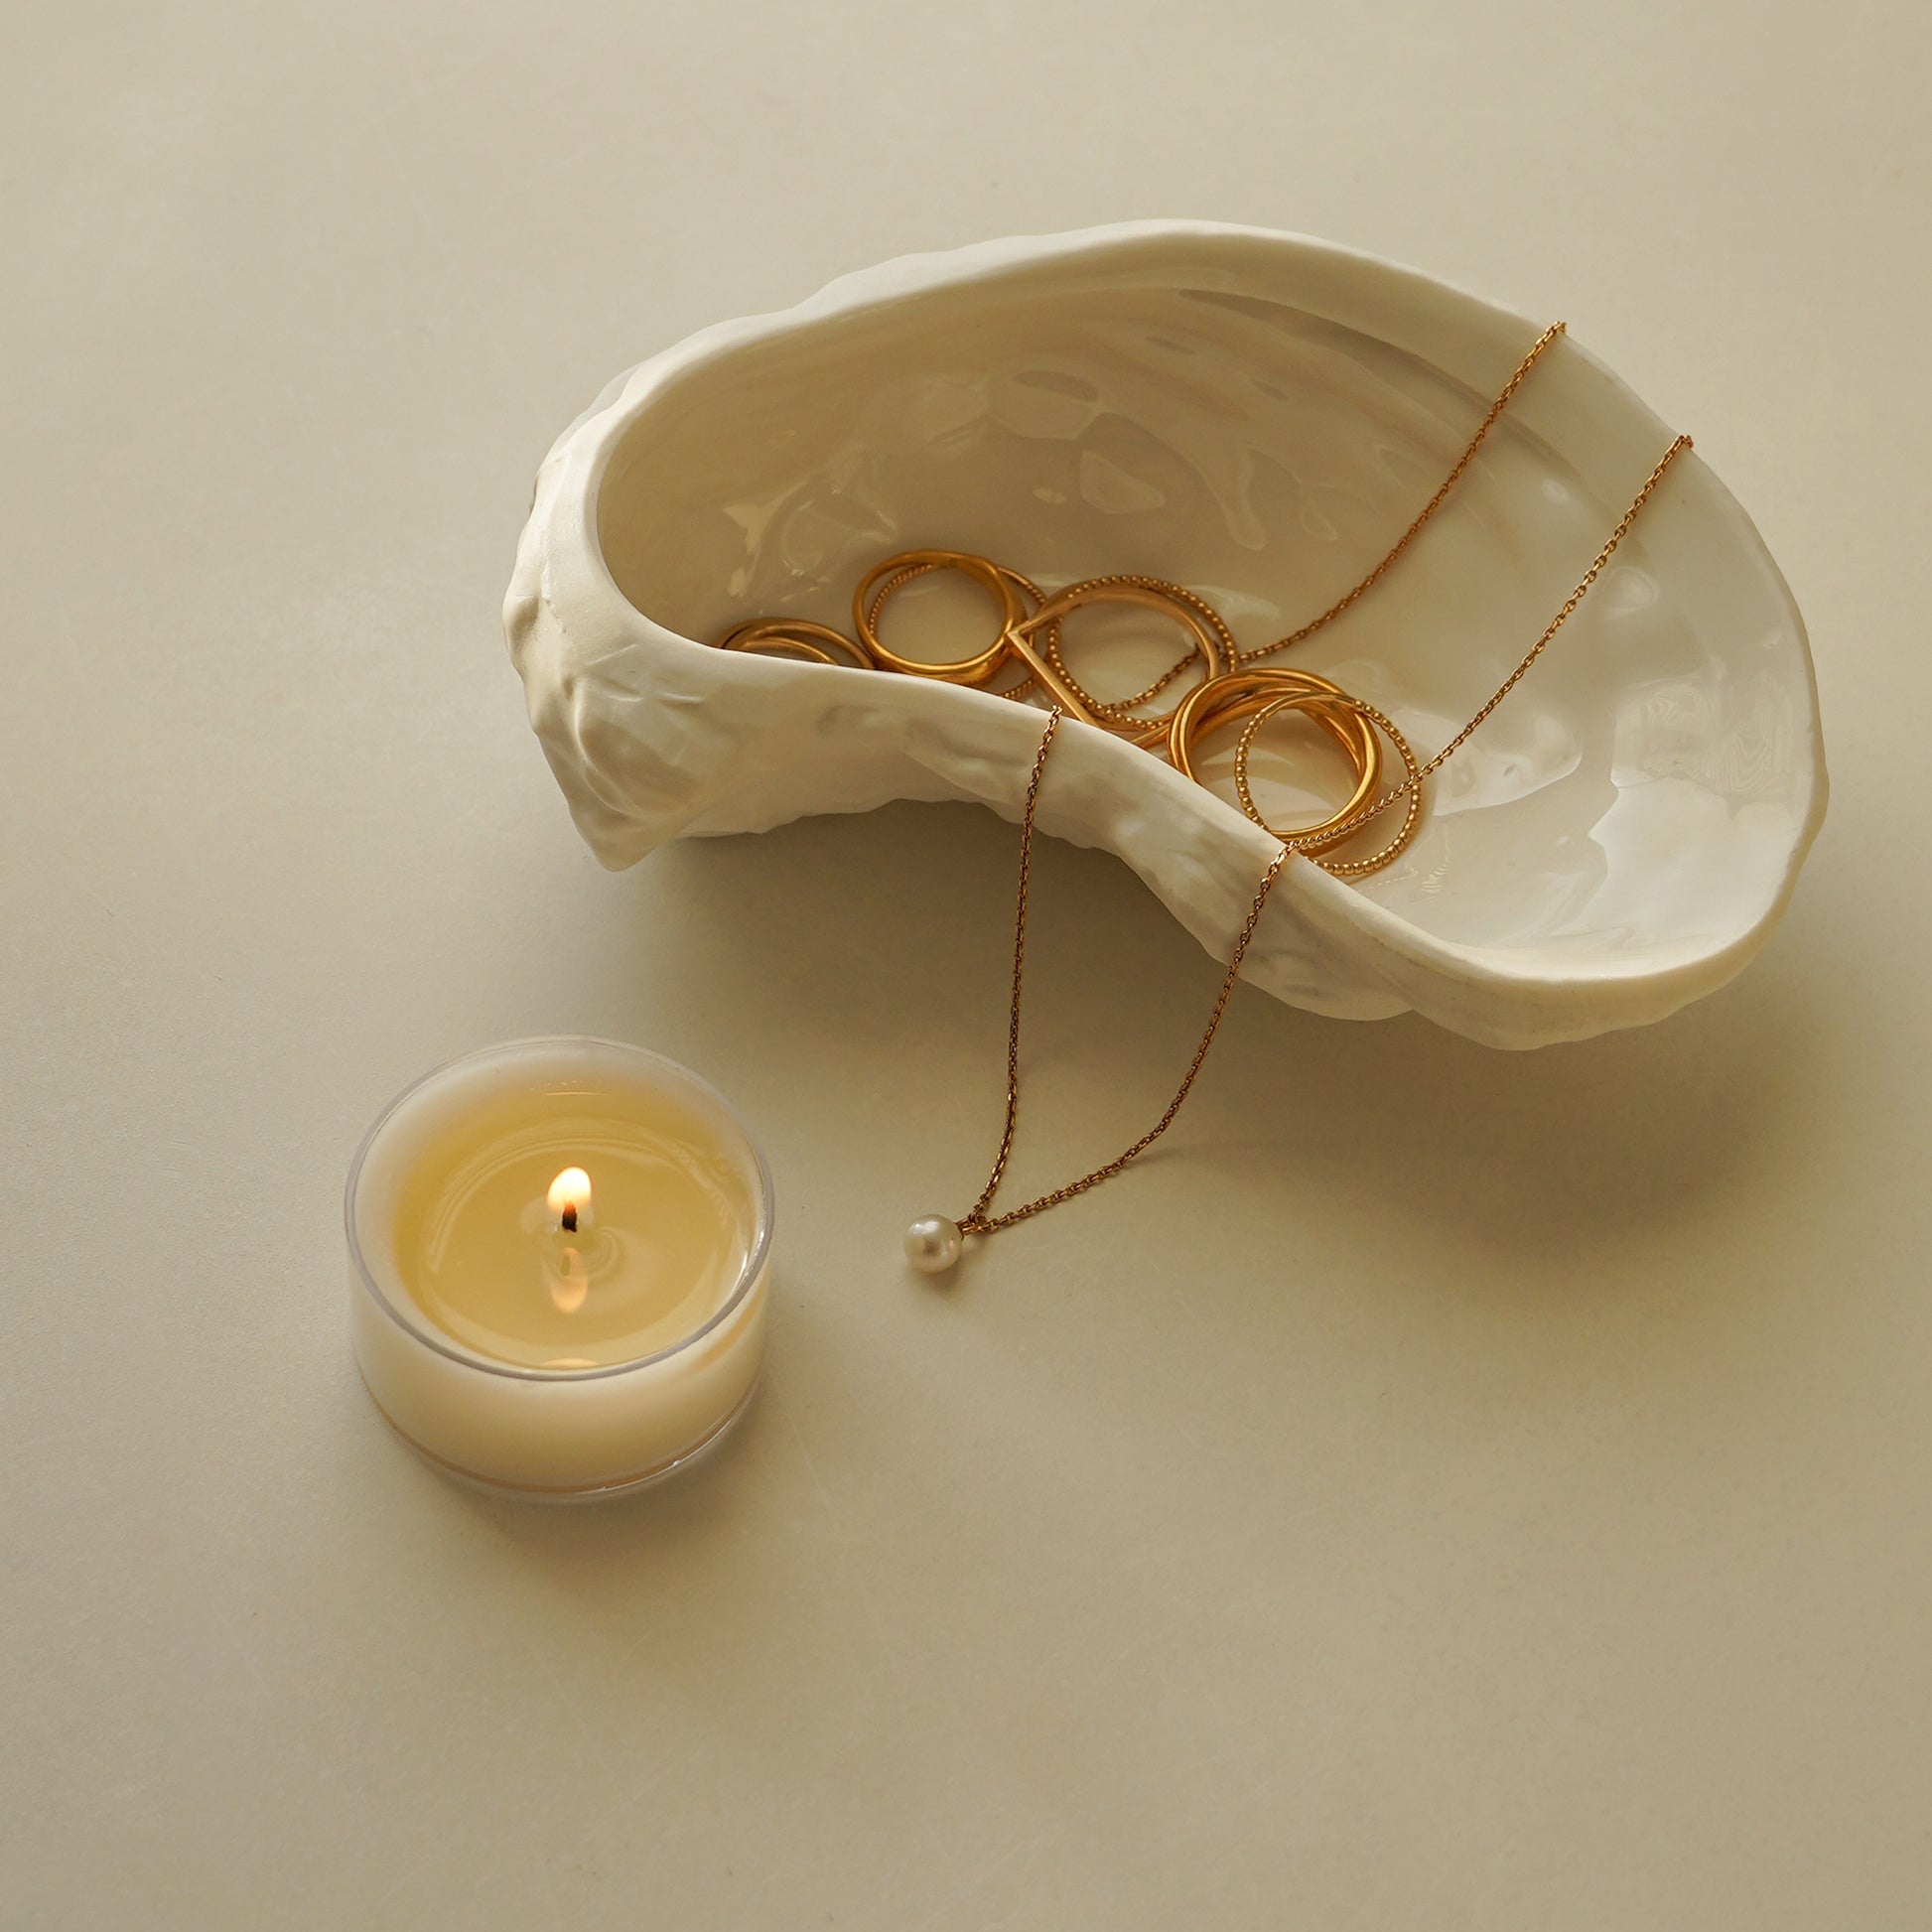 gold jewelry in oyster dish and a lit tealight candle